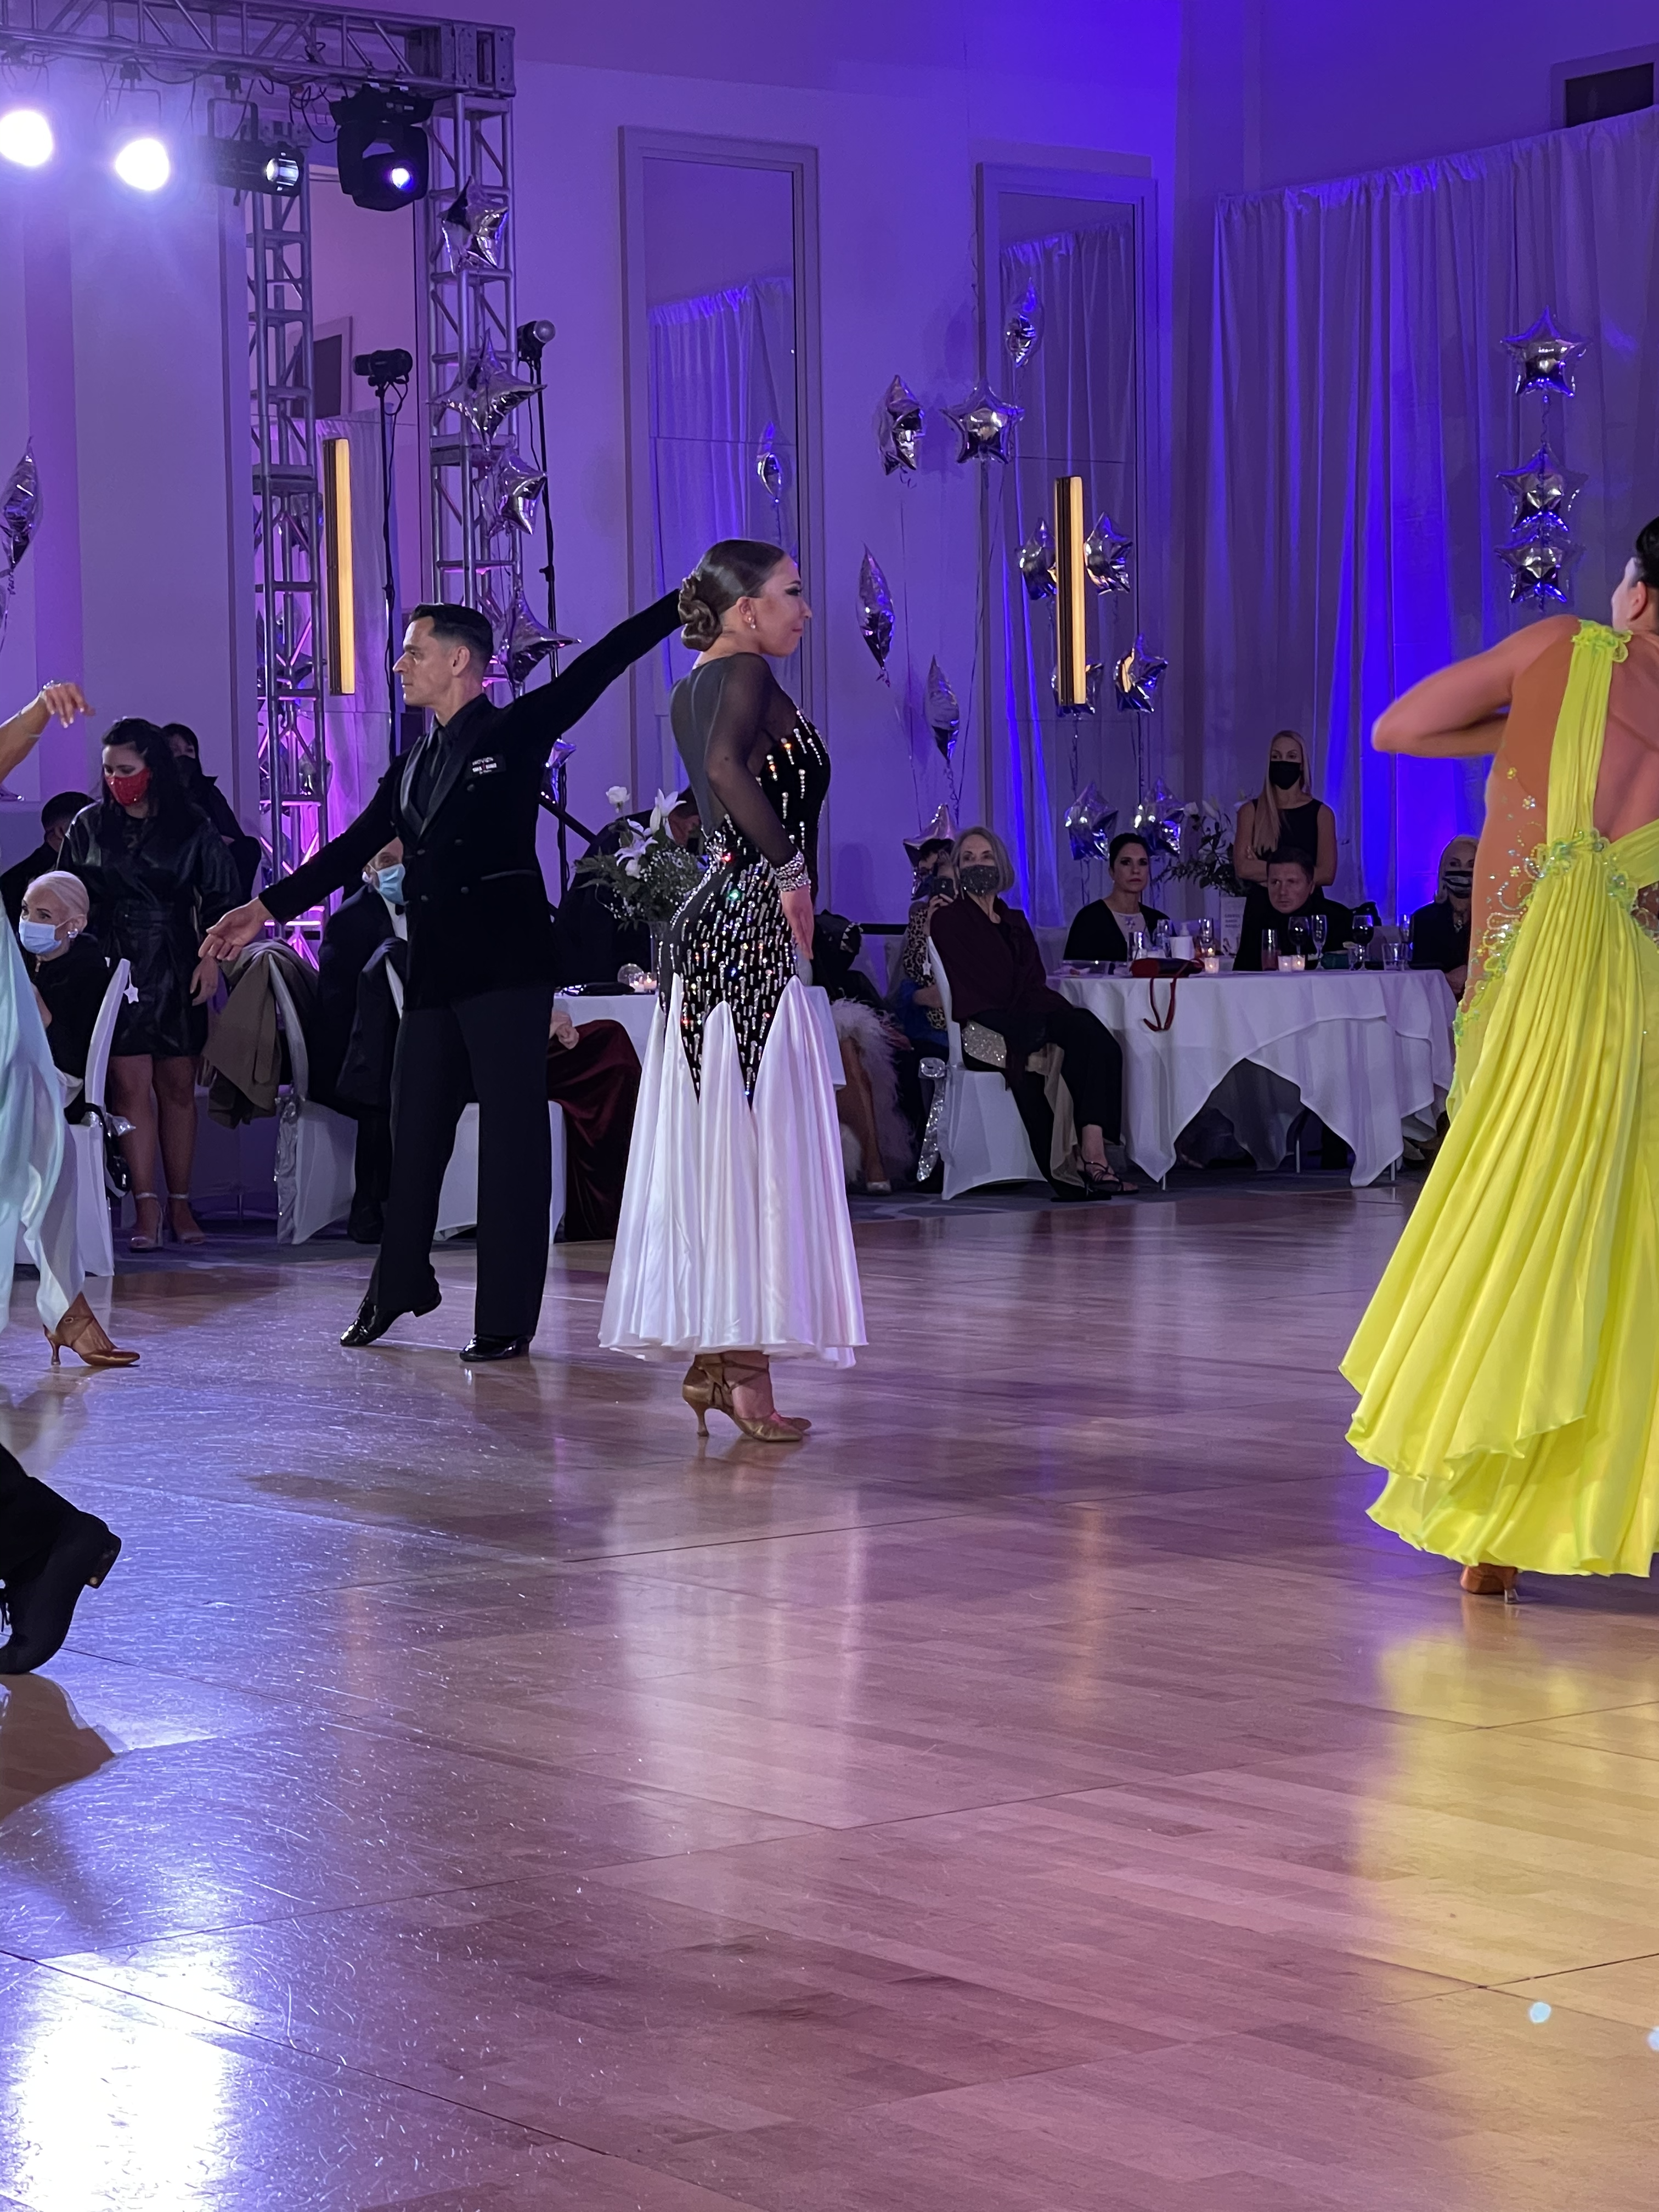 Image for the blog: A Day in the Life of a Professional Ballroom Dancer